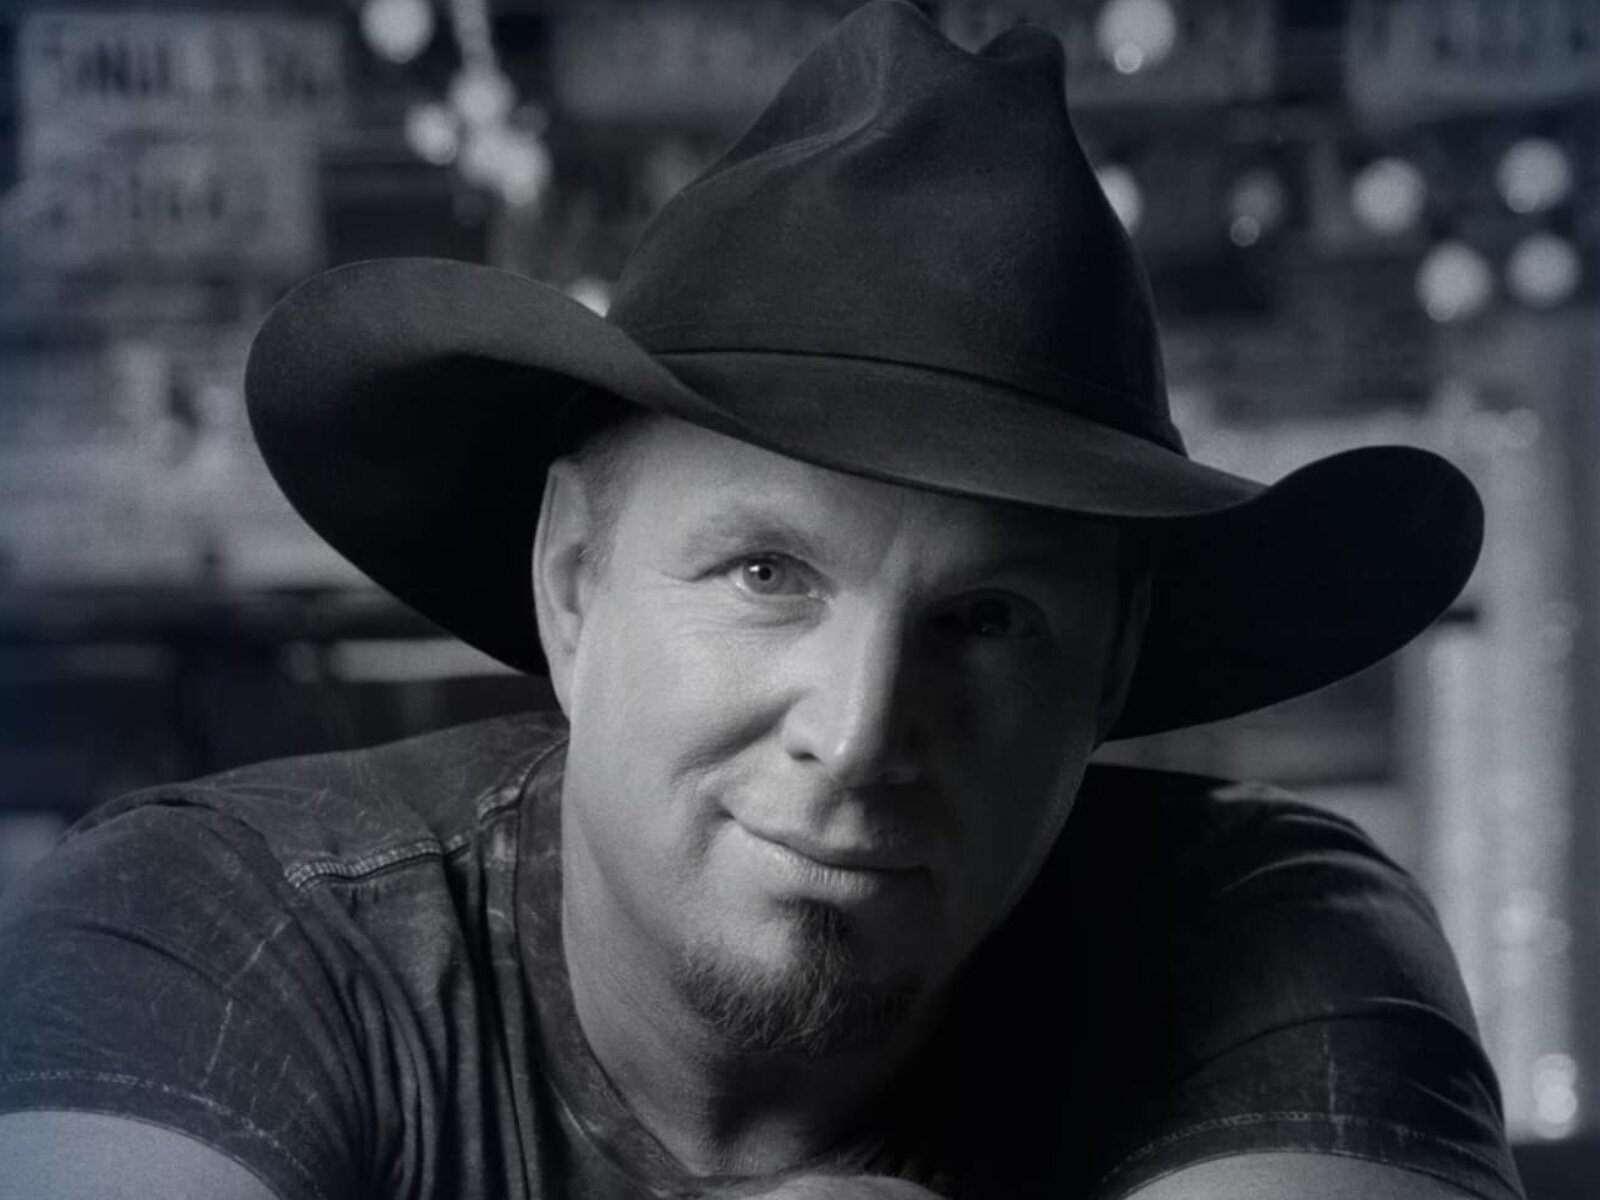 Garth Brooks to Hold Concert at Select Drive-In Theatres Across